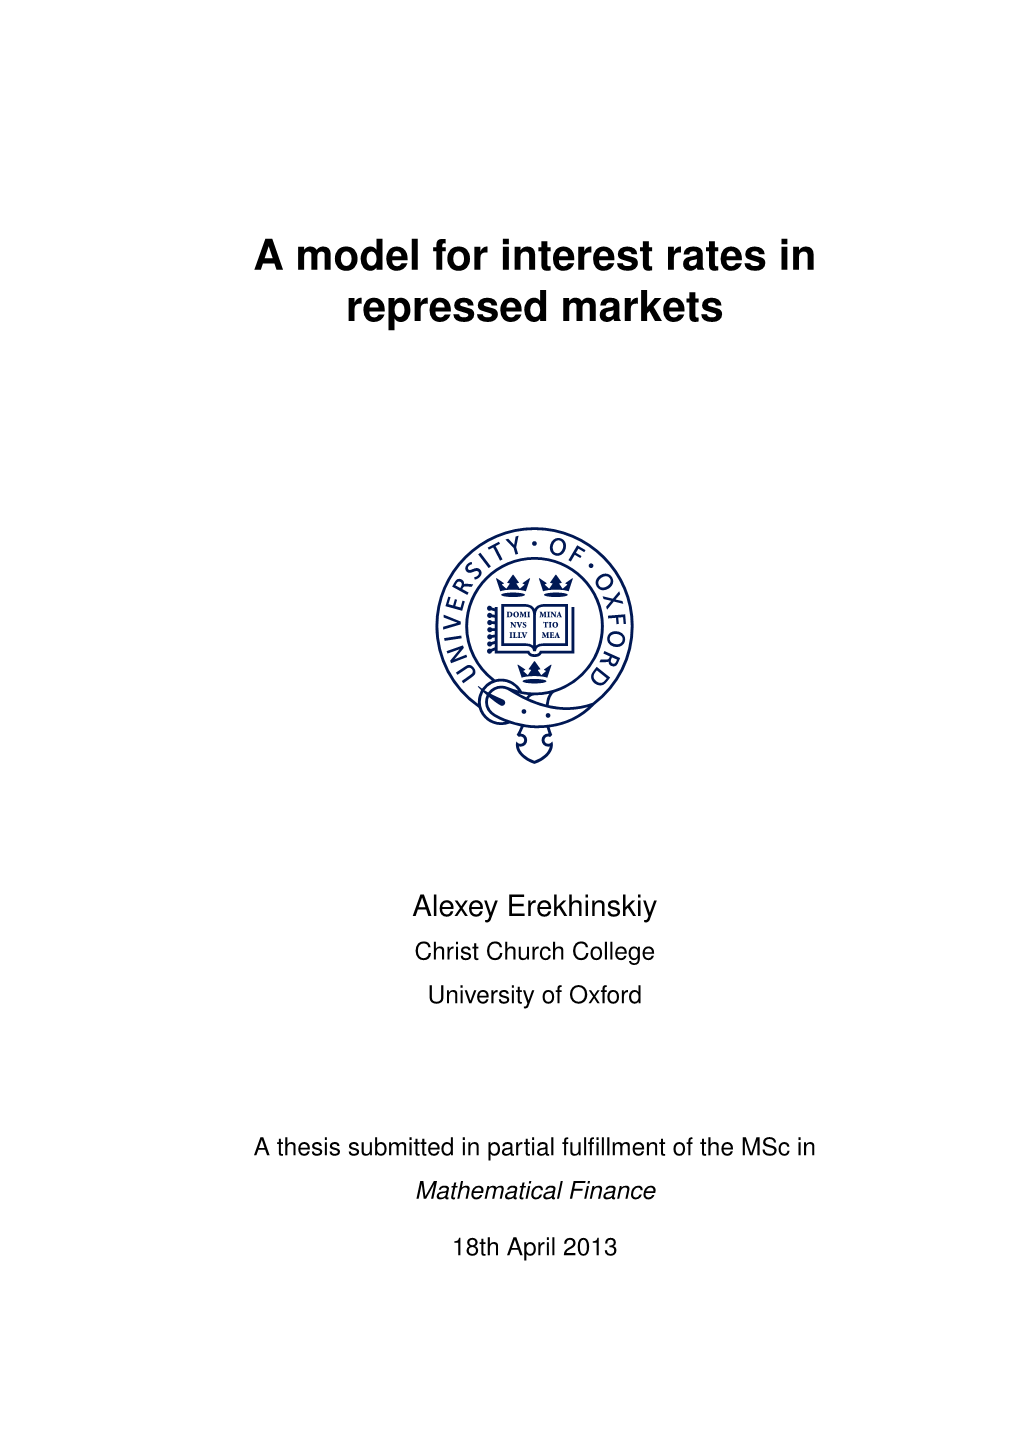 A Model for Interest Rates in Repressed Markets